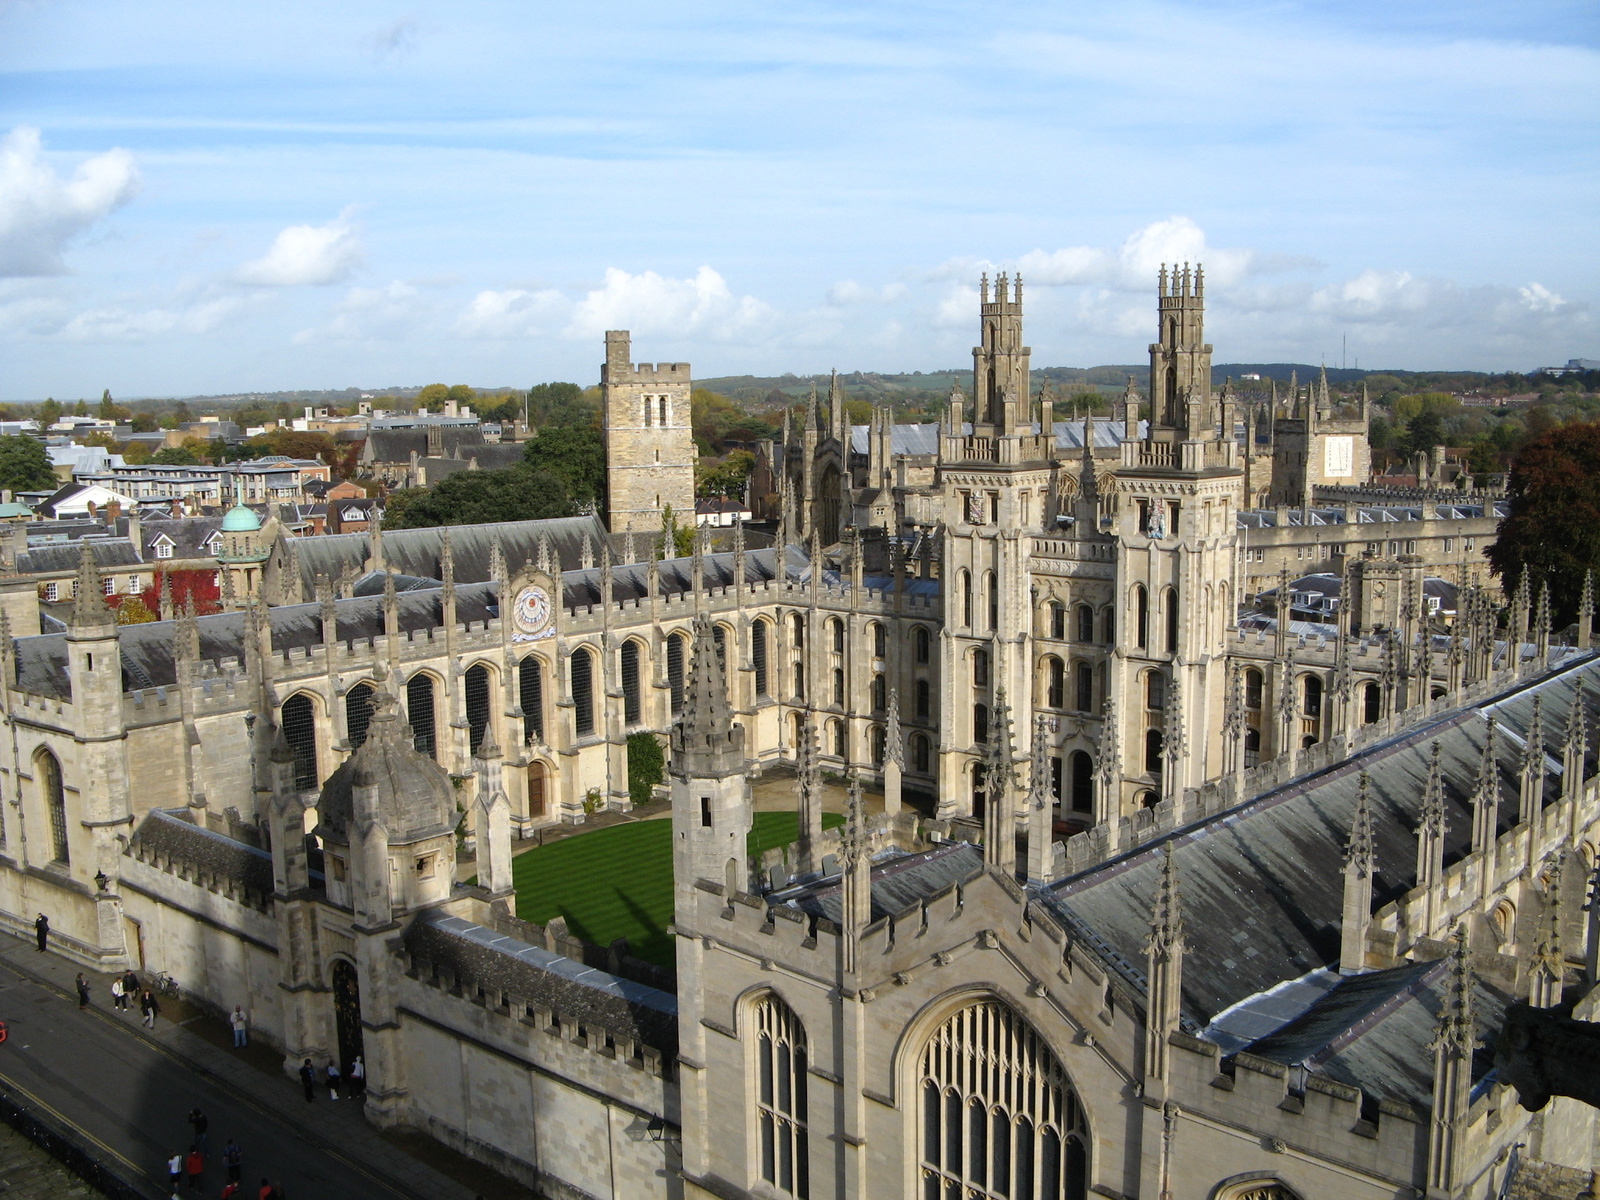 42 All Souls College